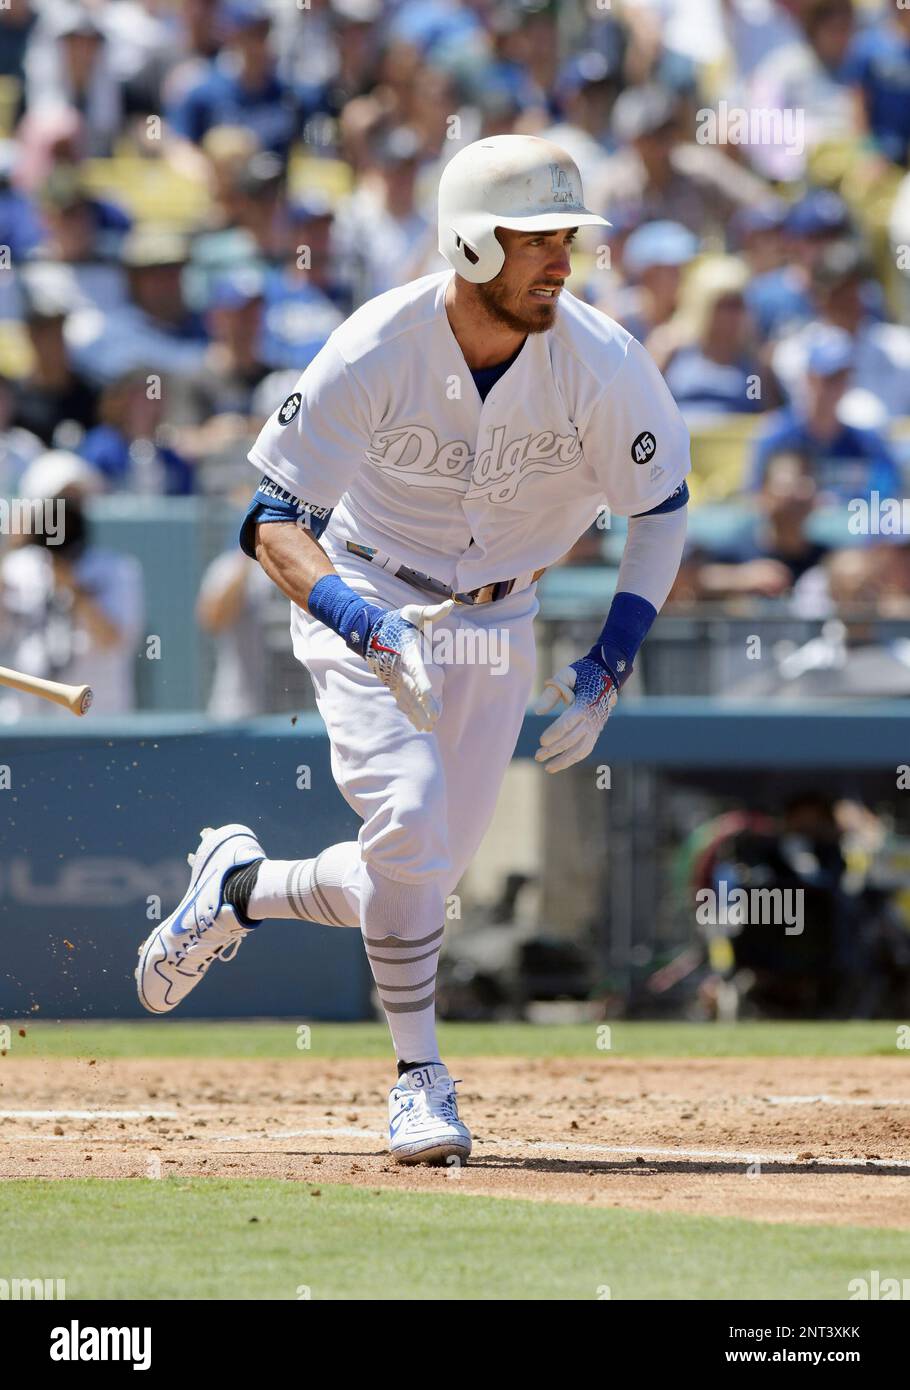 LOS ANGELES, CA - AUGUST 24: Los Angeles Dodgers right fielder